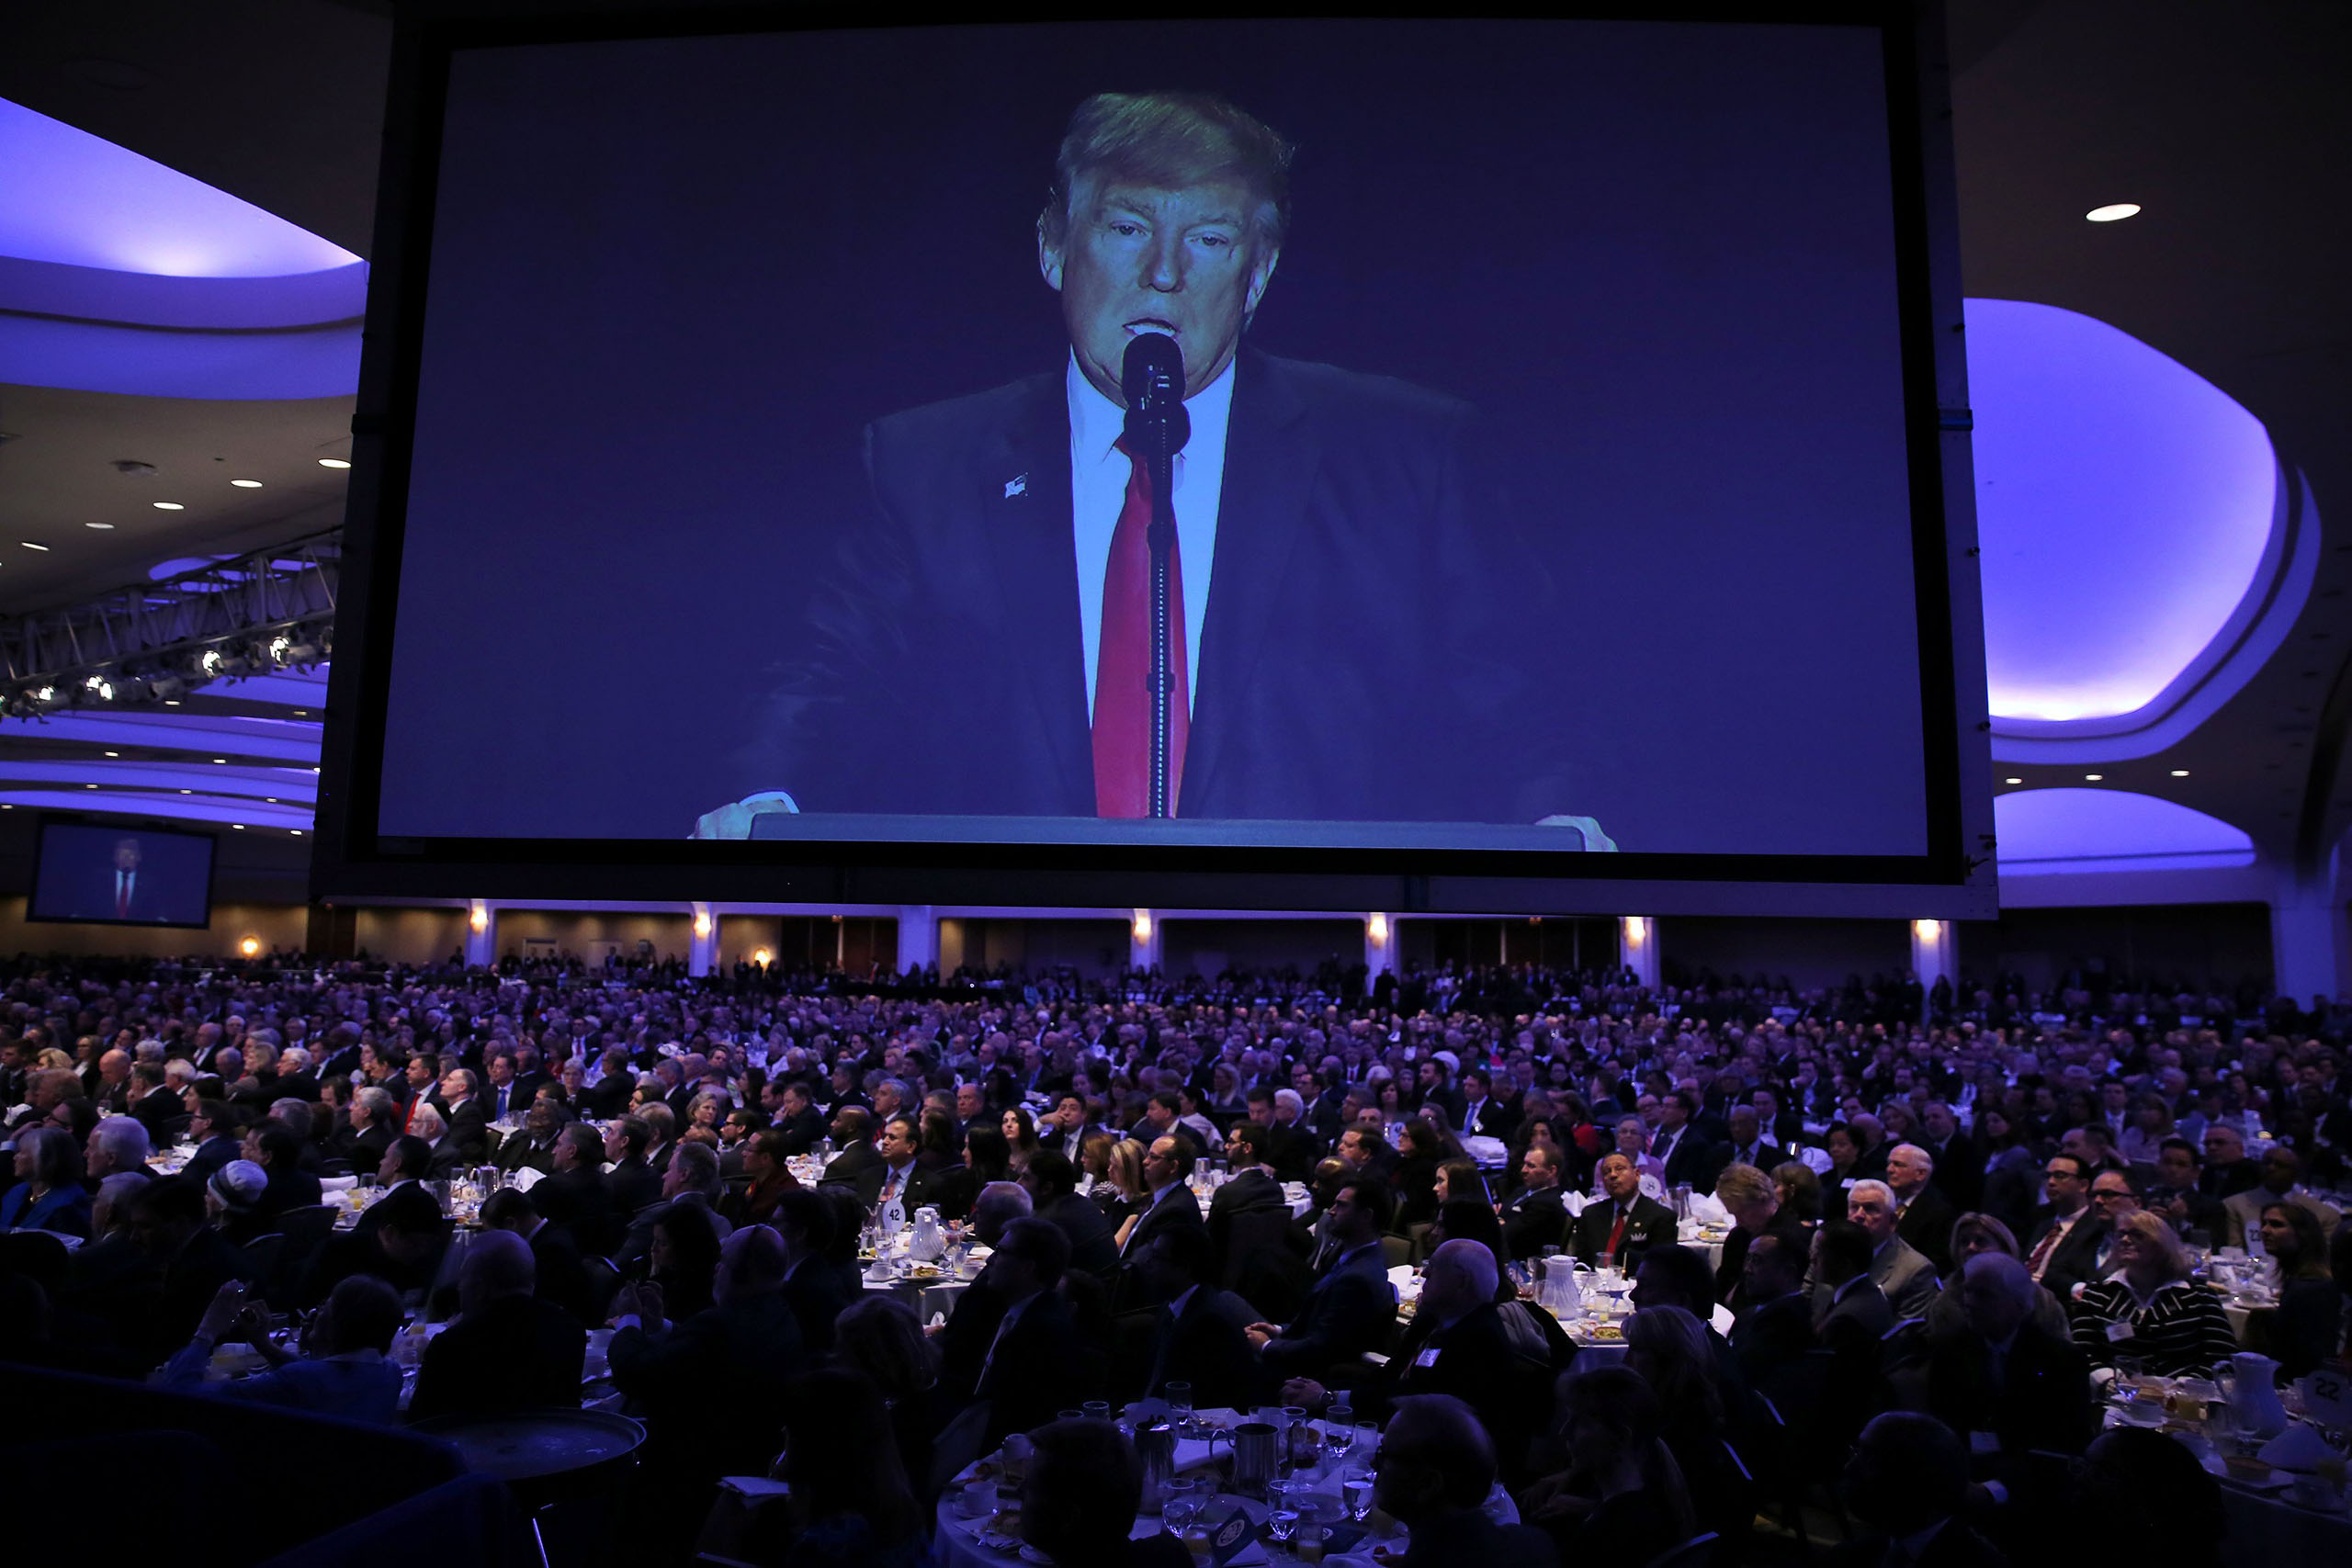 President Donald Trump is seen on a screen as he delivers remarks at the National Prayer Breakfast in Washington, on Feb. 2, 2017.